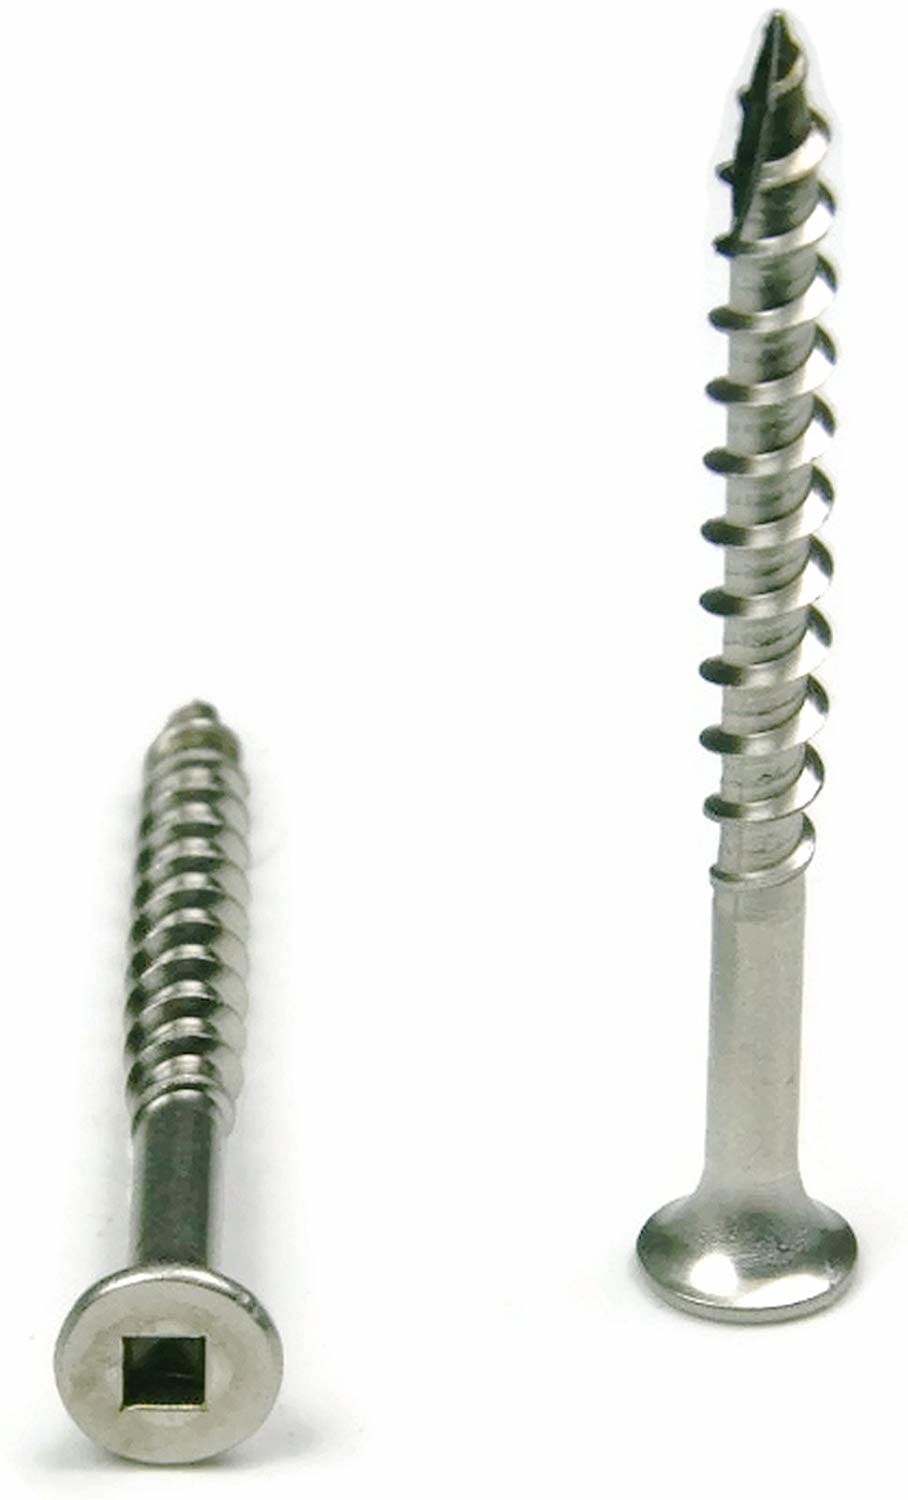 #6 x 1-1/2" Stainless Steel Wood Screw Square Drive, Bugle Head (Quantity: 1000) Type 17 Wood Cutting Point, 1" of Thread Length, #6 Screw Diameter, 1-1/2" Screw Length - image 1 of 1